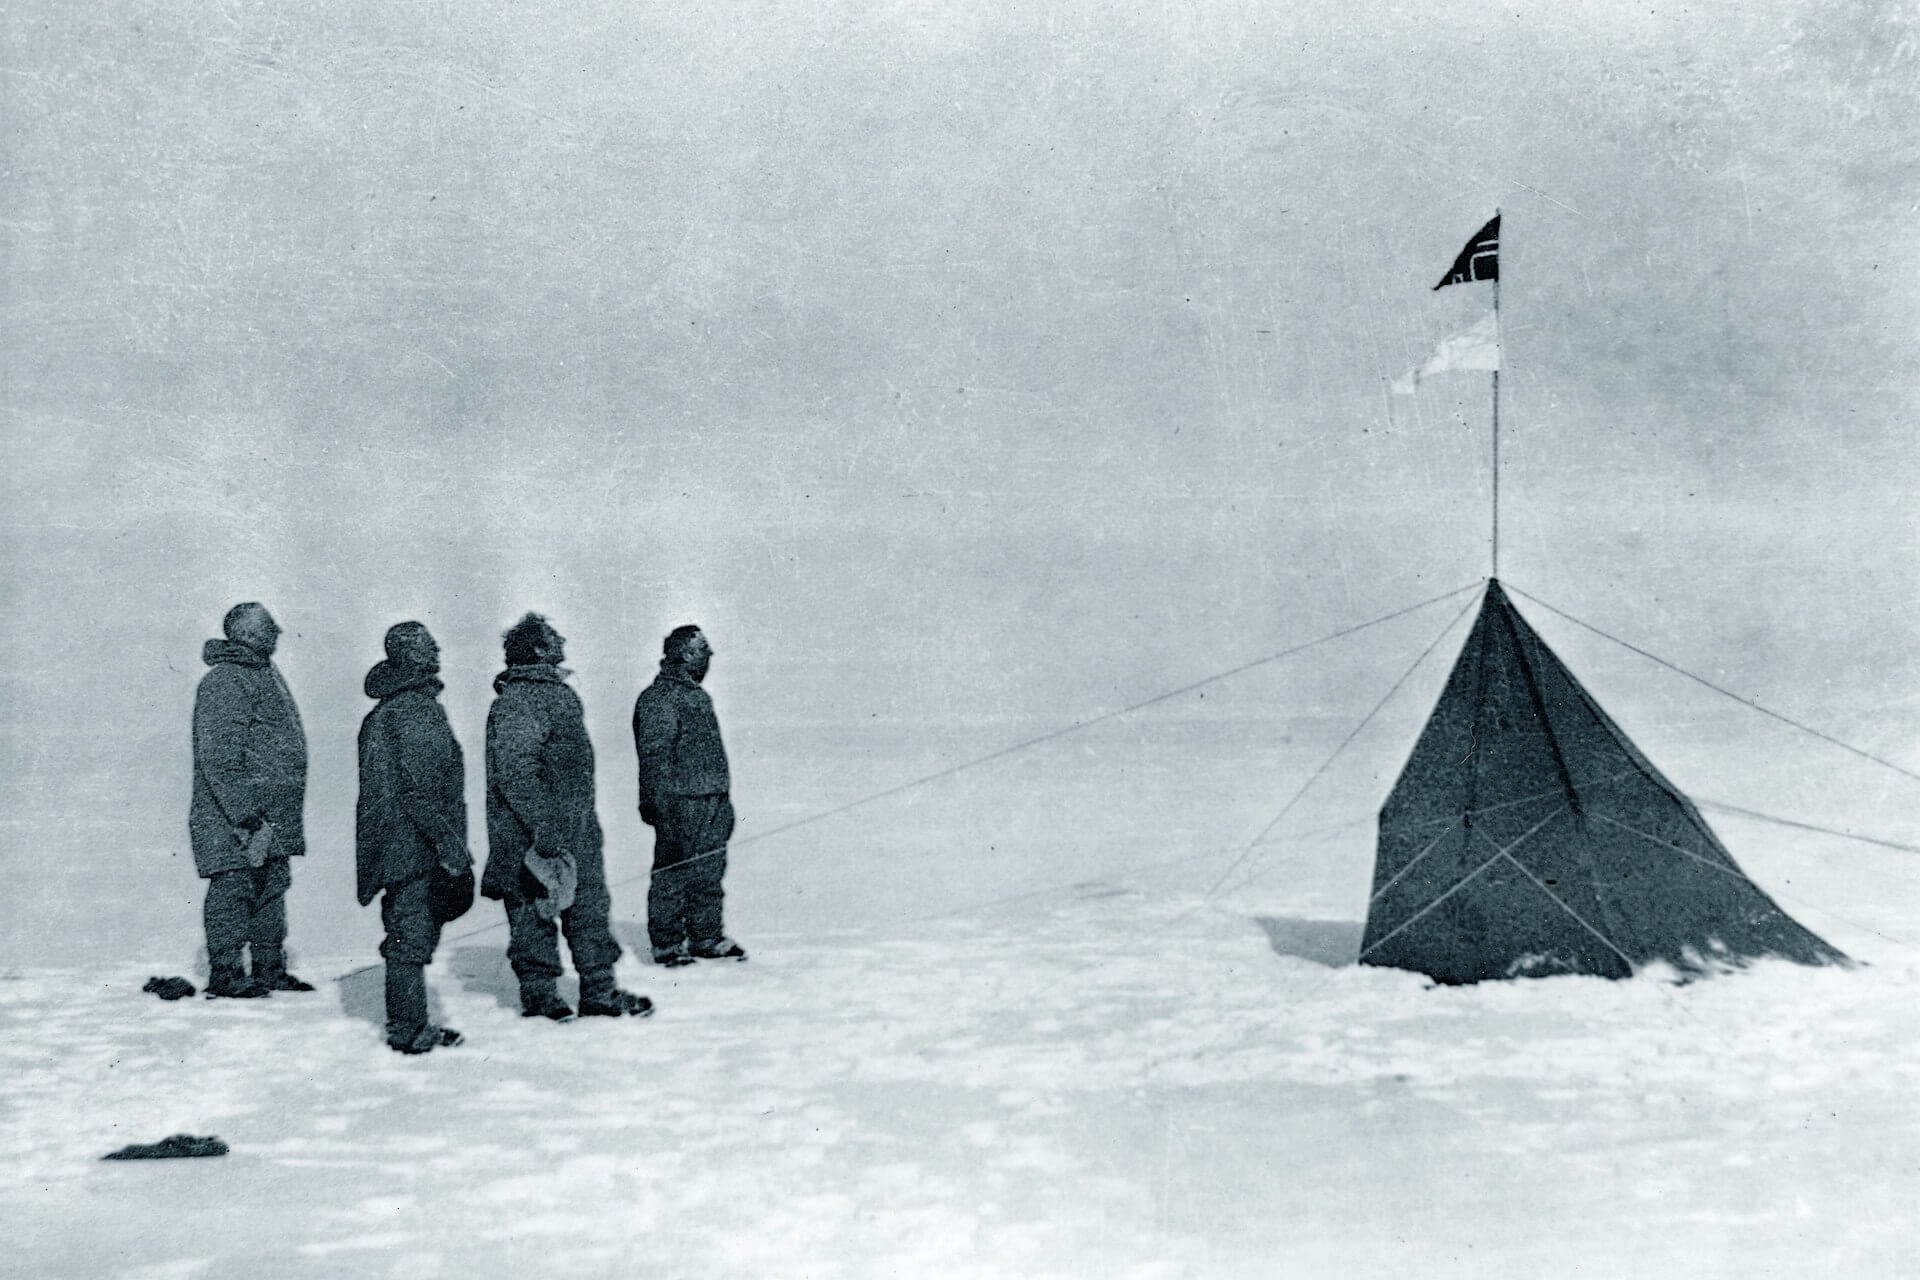 Amundsen's expedition team stand at the South Pole in December 1911